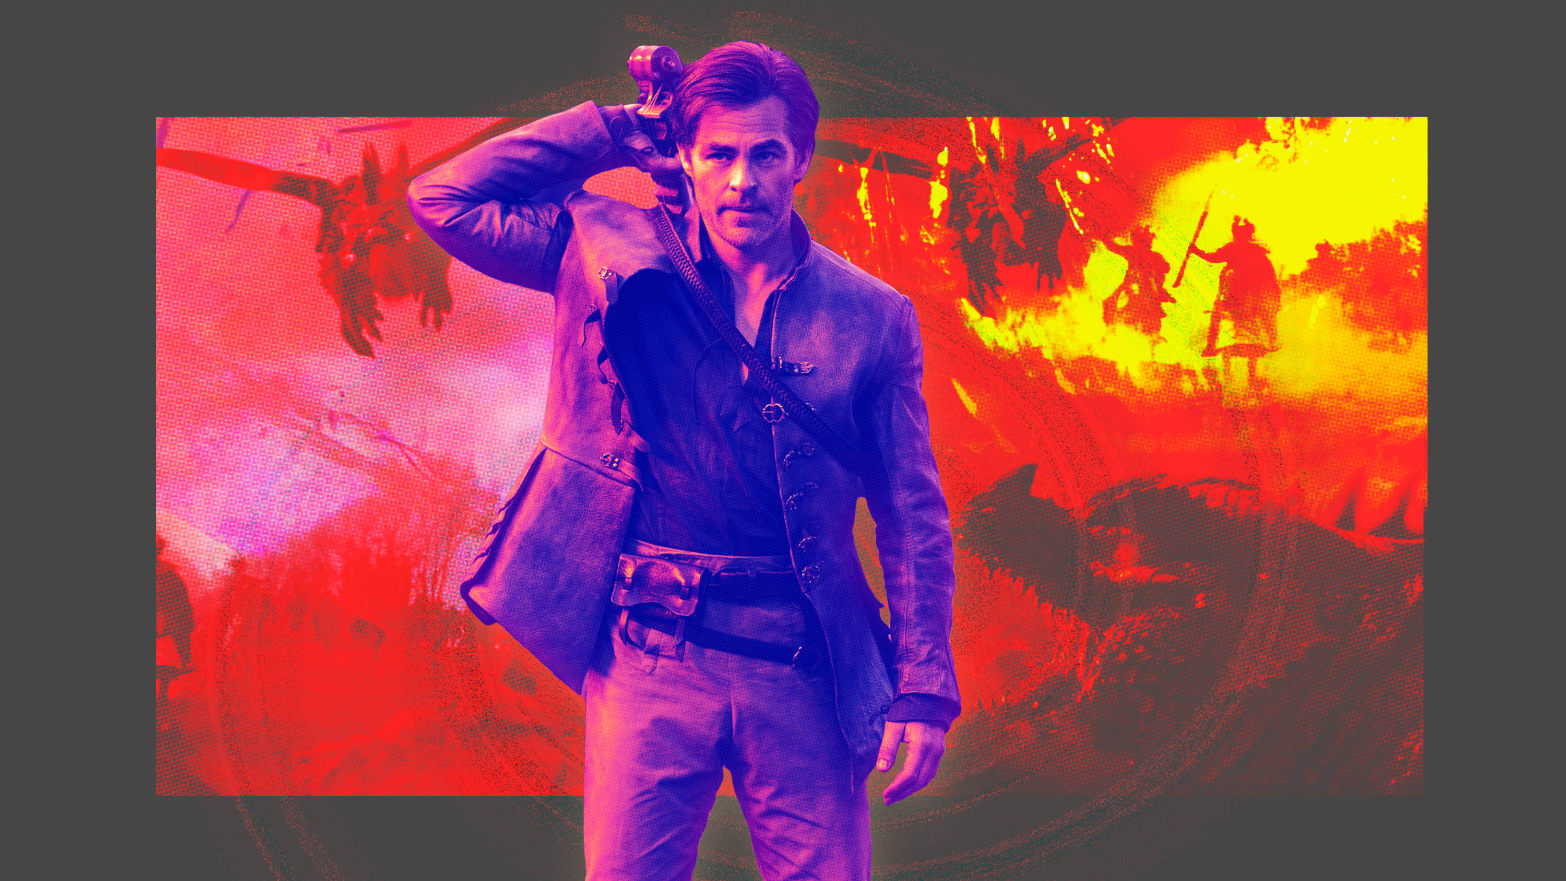 Illustration of Chris Pine in the forefront, scene from Dungeons & Dragons behind.